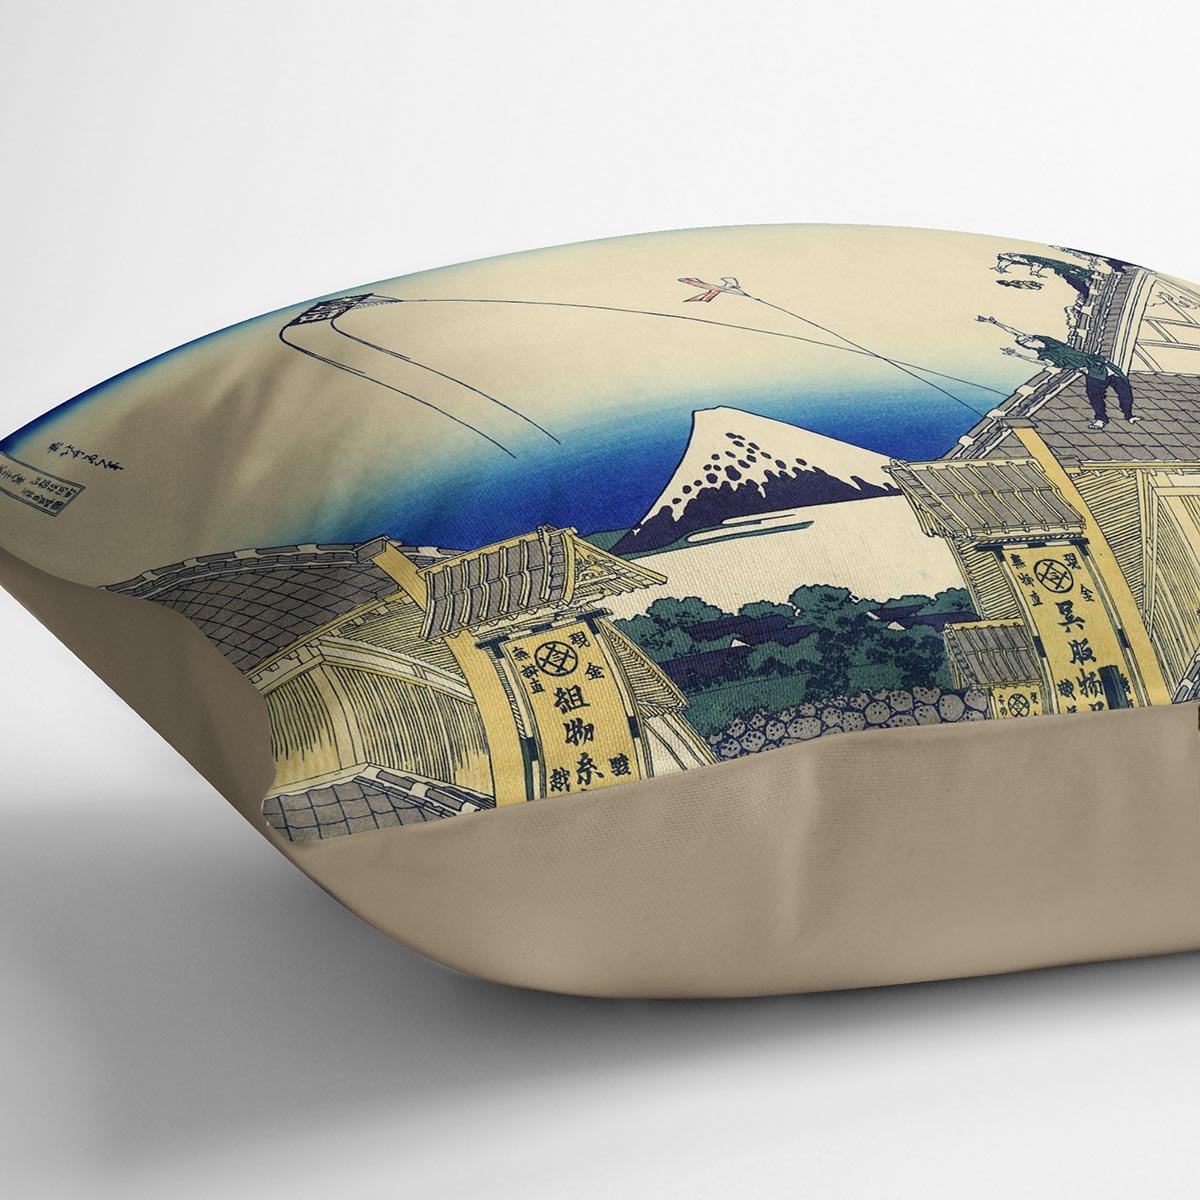 A sketch of the Mitsui shop by Hokusai Throw Pillow